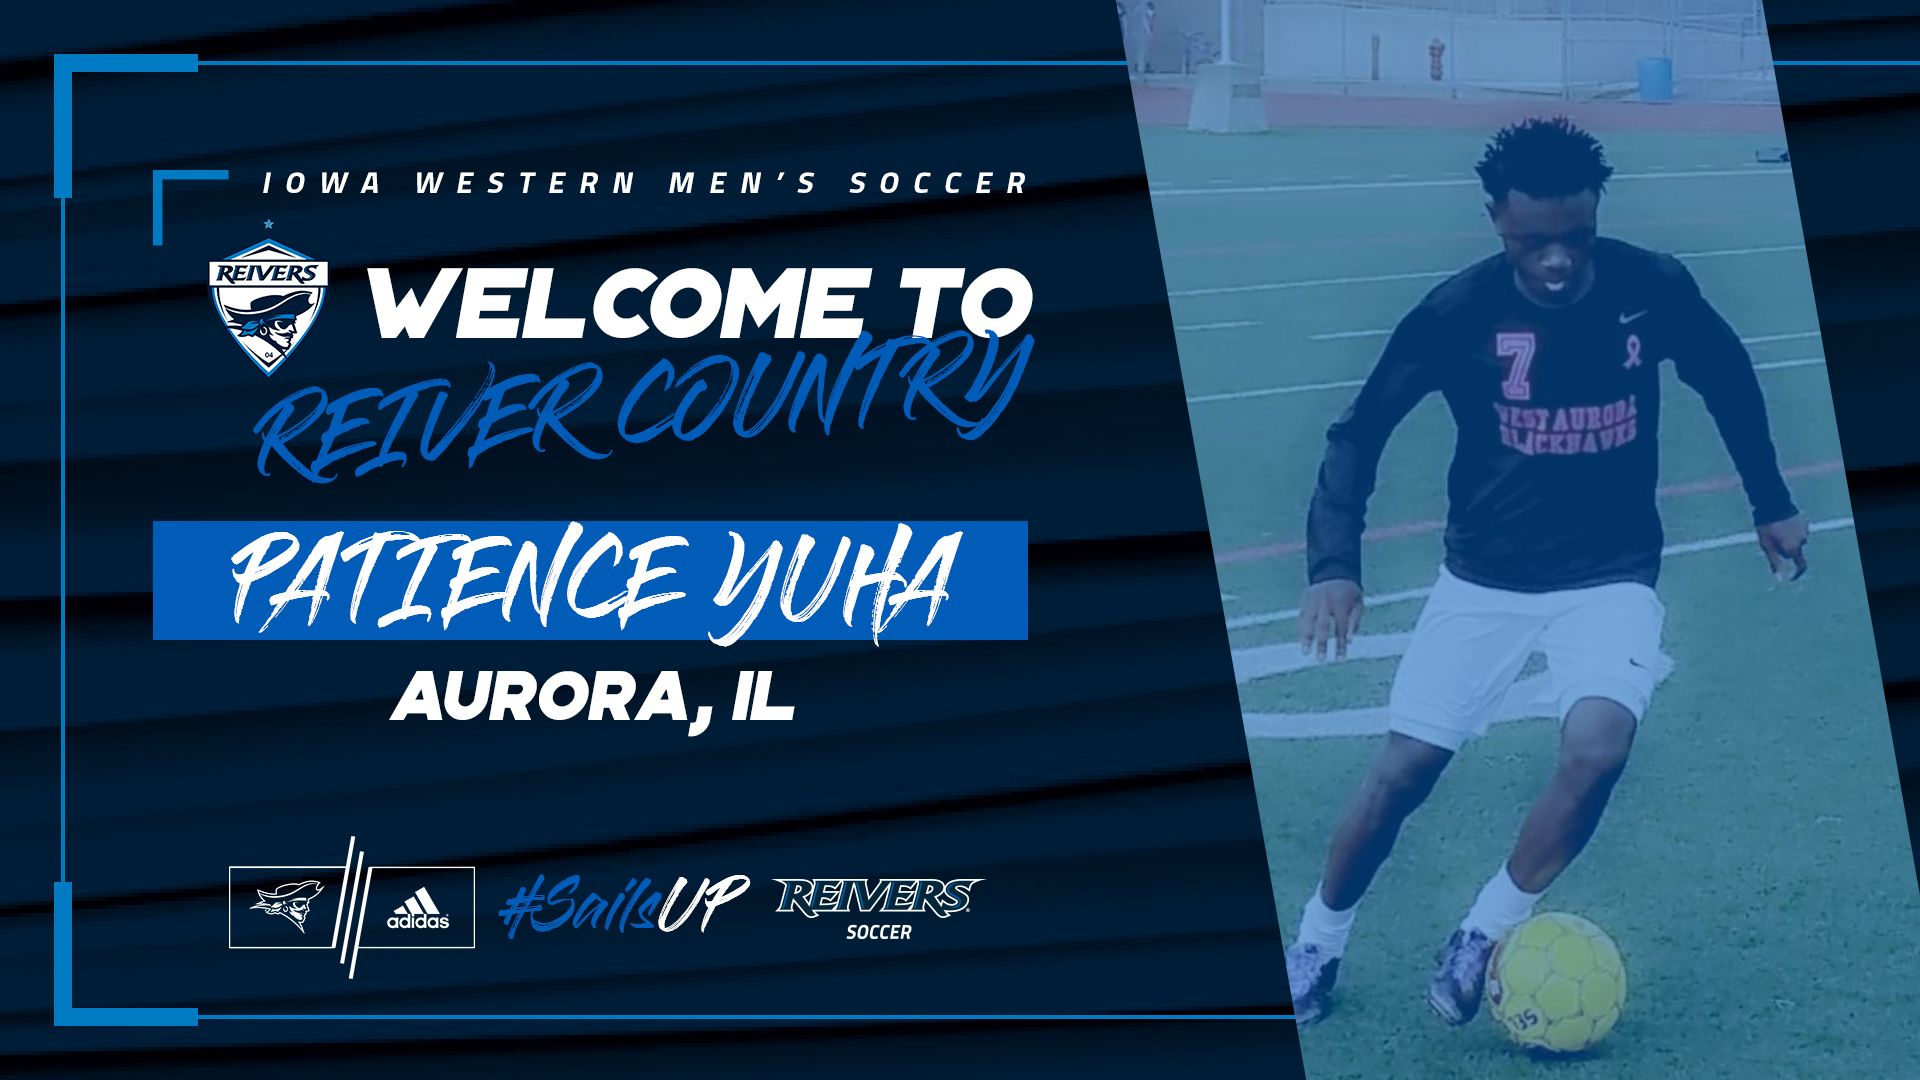 Iowa Western men's soccer add Patience Yuha to the squad for 2018-2019